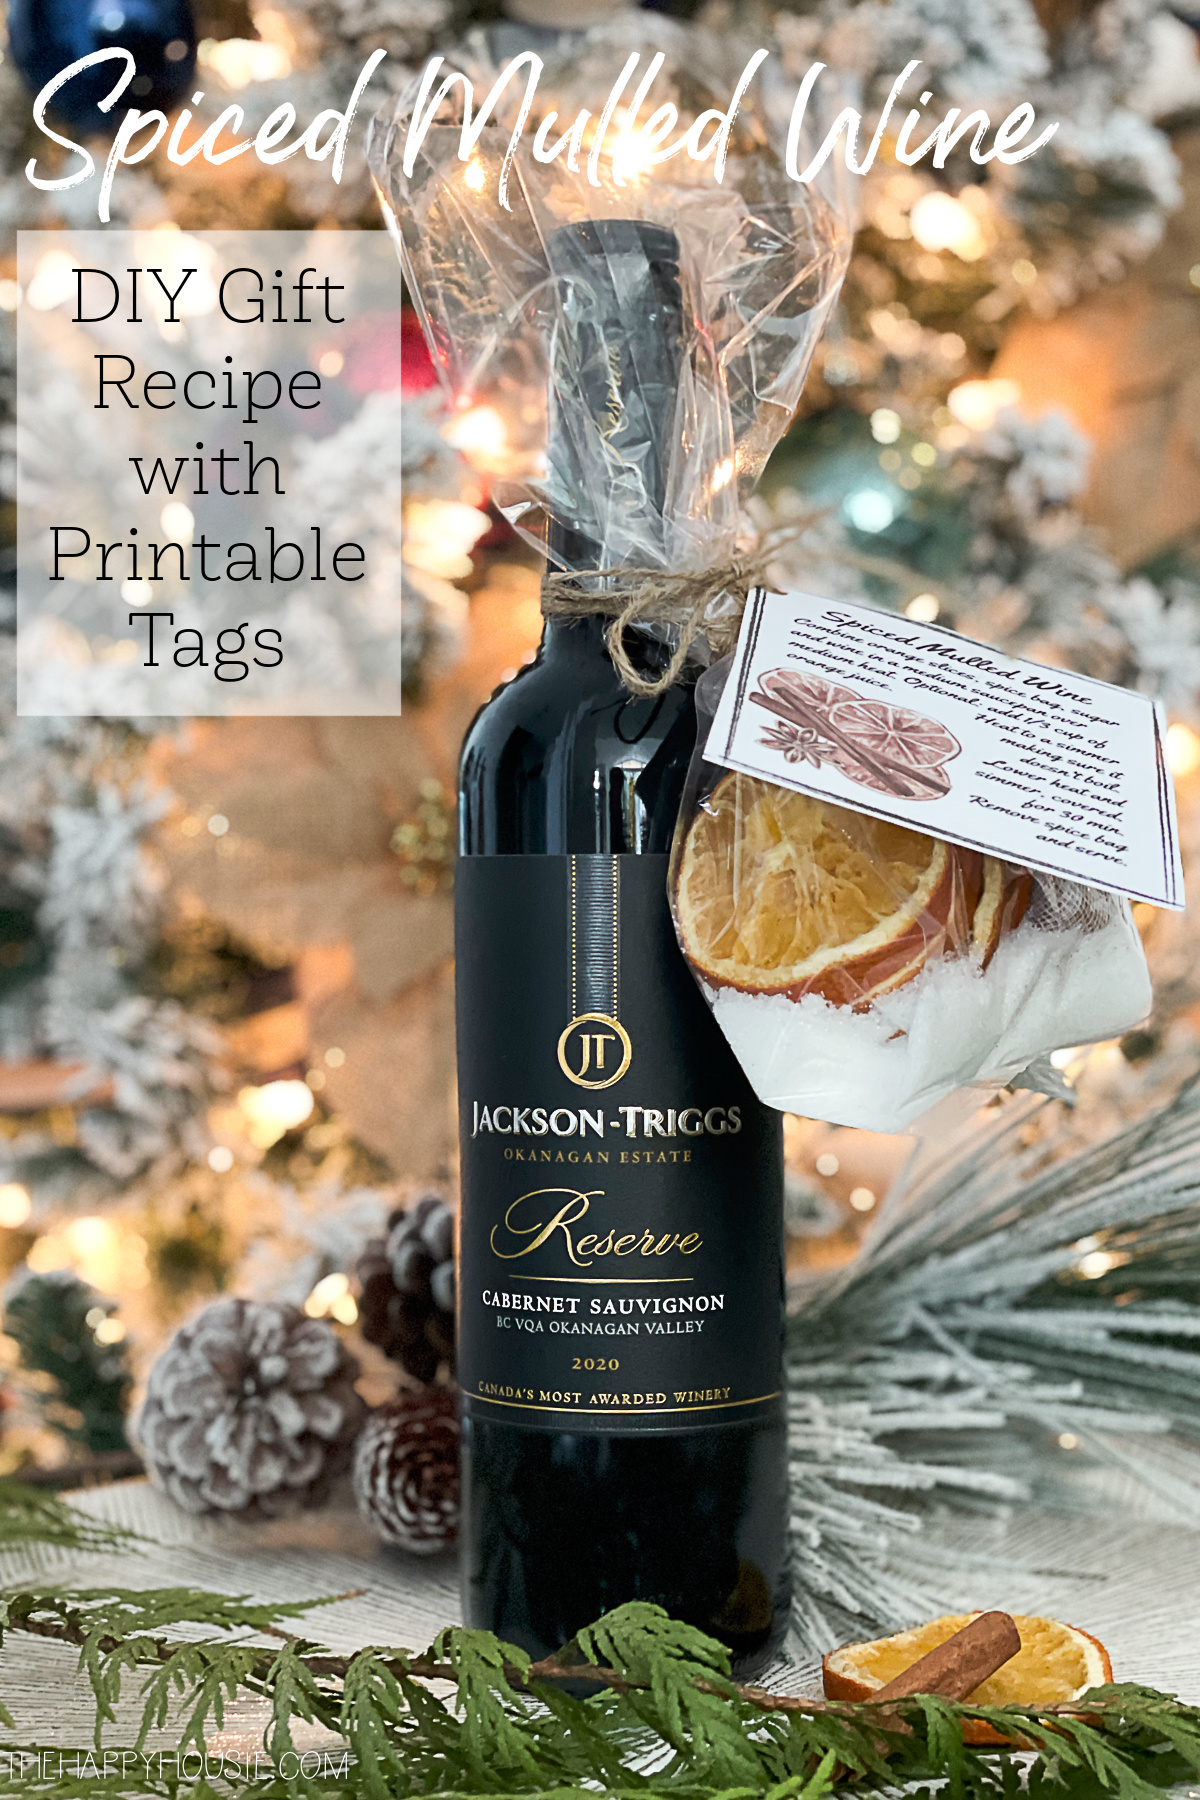 an image of a bottle of red wine with a mulling spice sachet and instructions for making mulled wine as a DIY Christmas gift idea